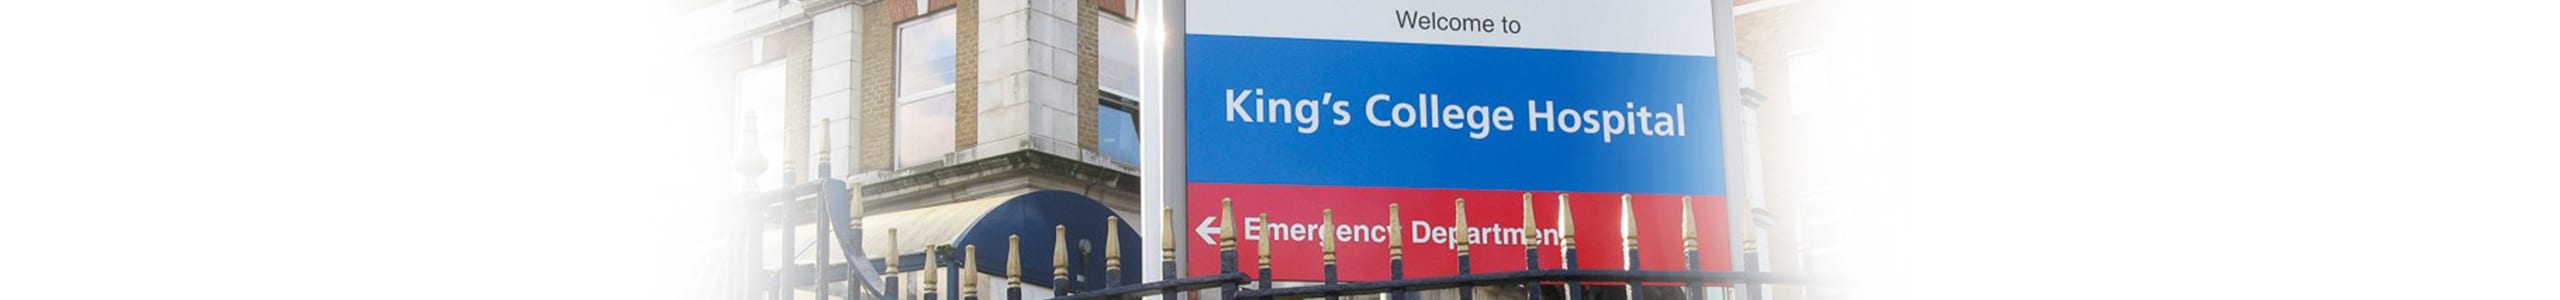 Kings College sign